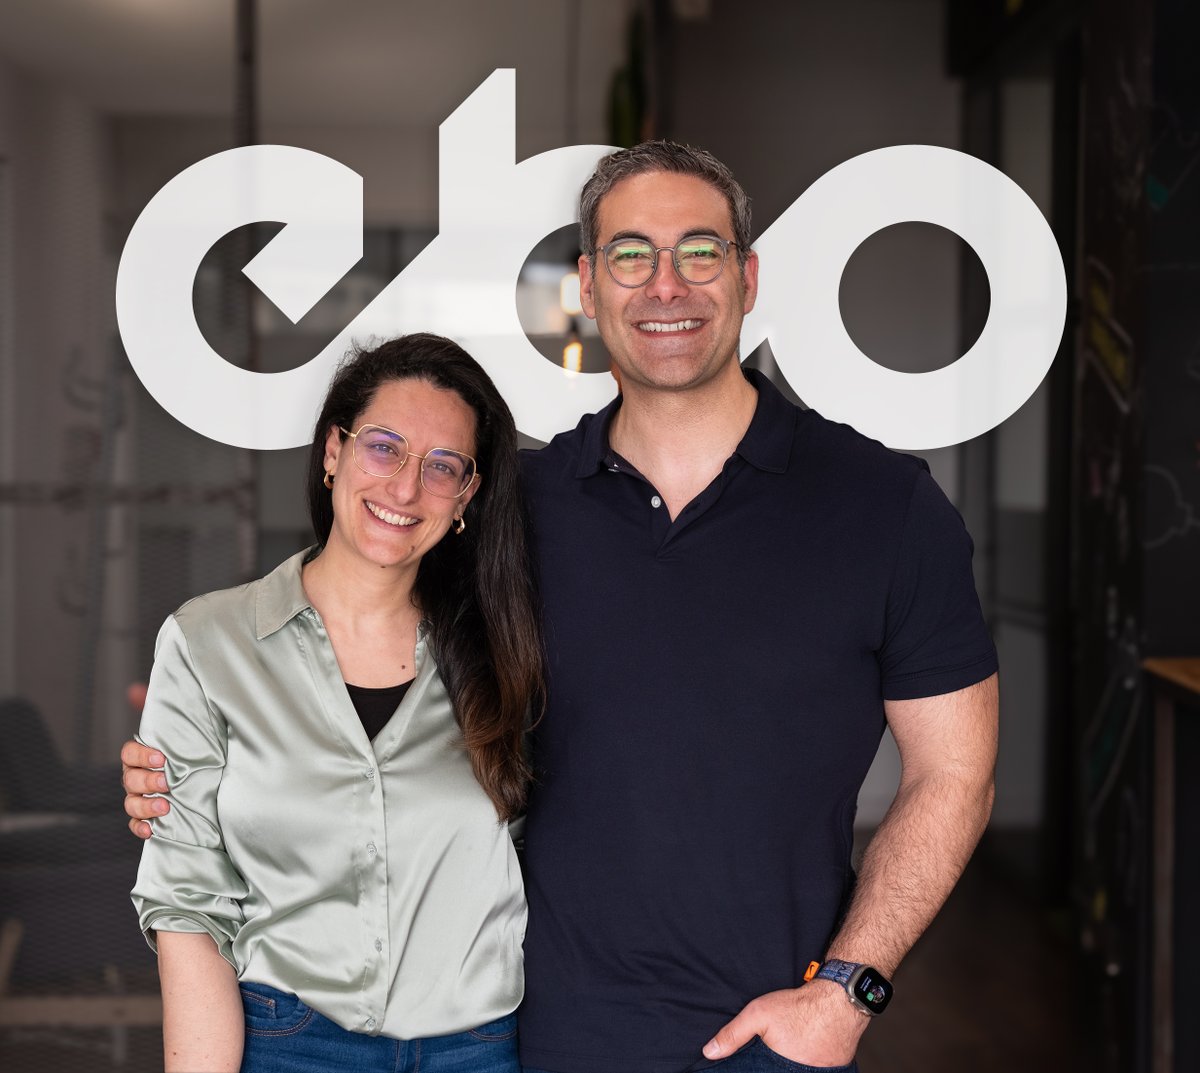 Shining a light on the marketing mastermind at @EBO_ai Nikki Schinas! Her leadership & vision are propelling our presence in #healthtech & #fintech. Let's celebrate Nikki & the power of clear AI communication! #EBO #Leadership #AICommunications